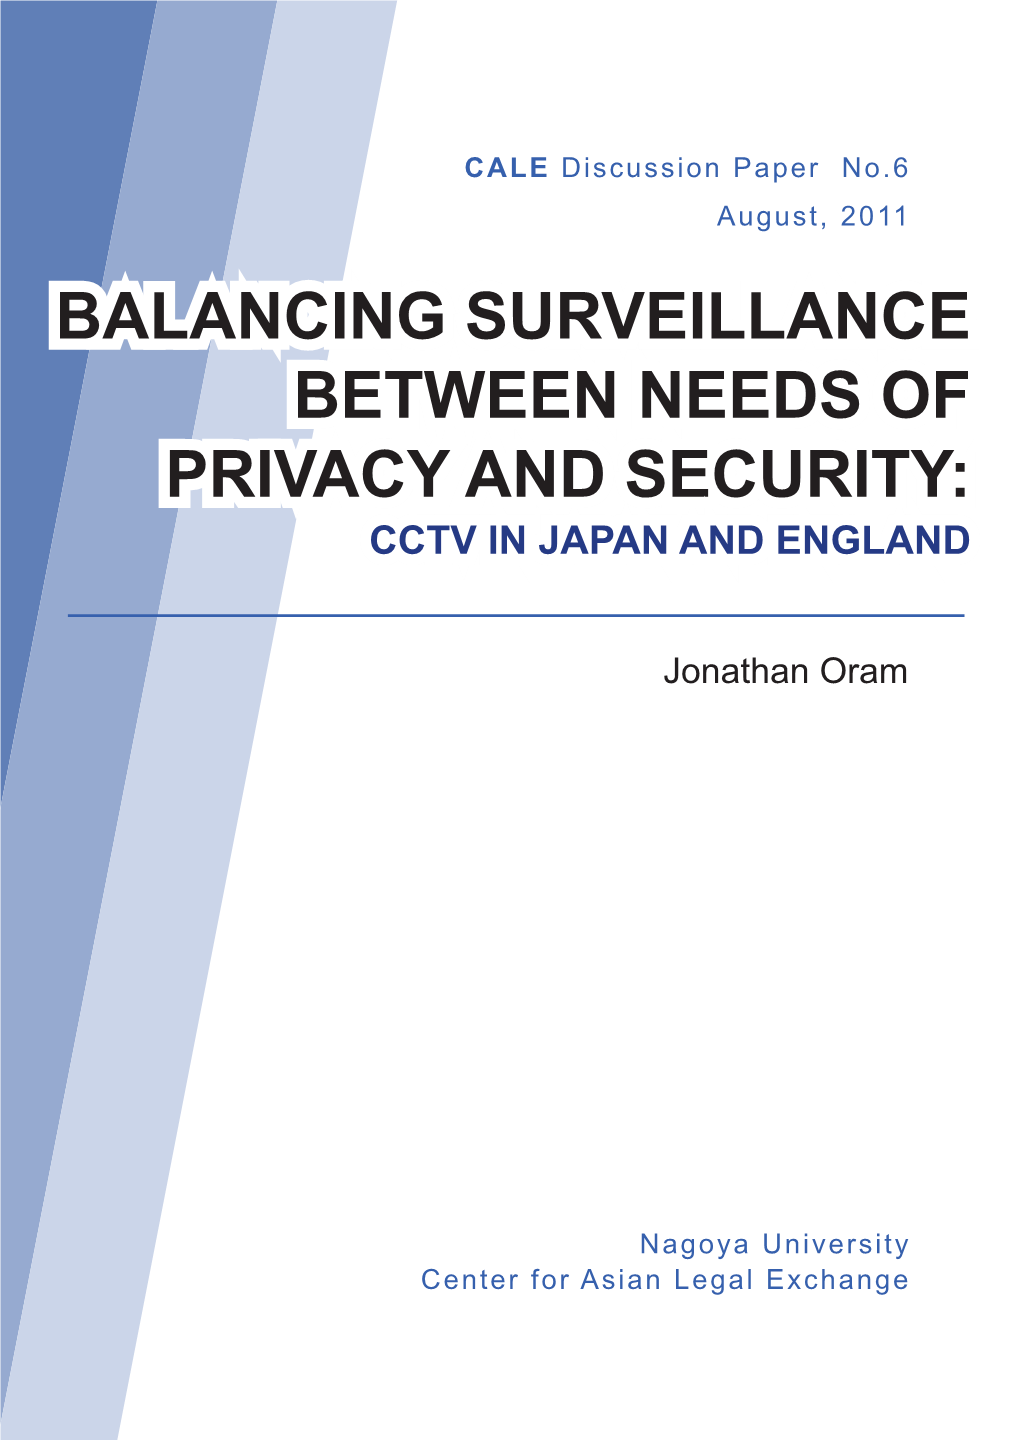 Balancing Surveillance Between Needs of Privacy and Security: Cctv in Japan and England